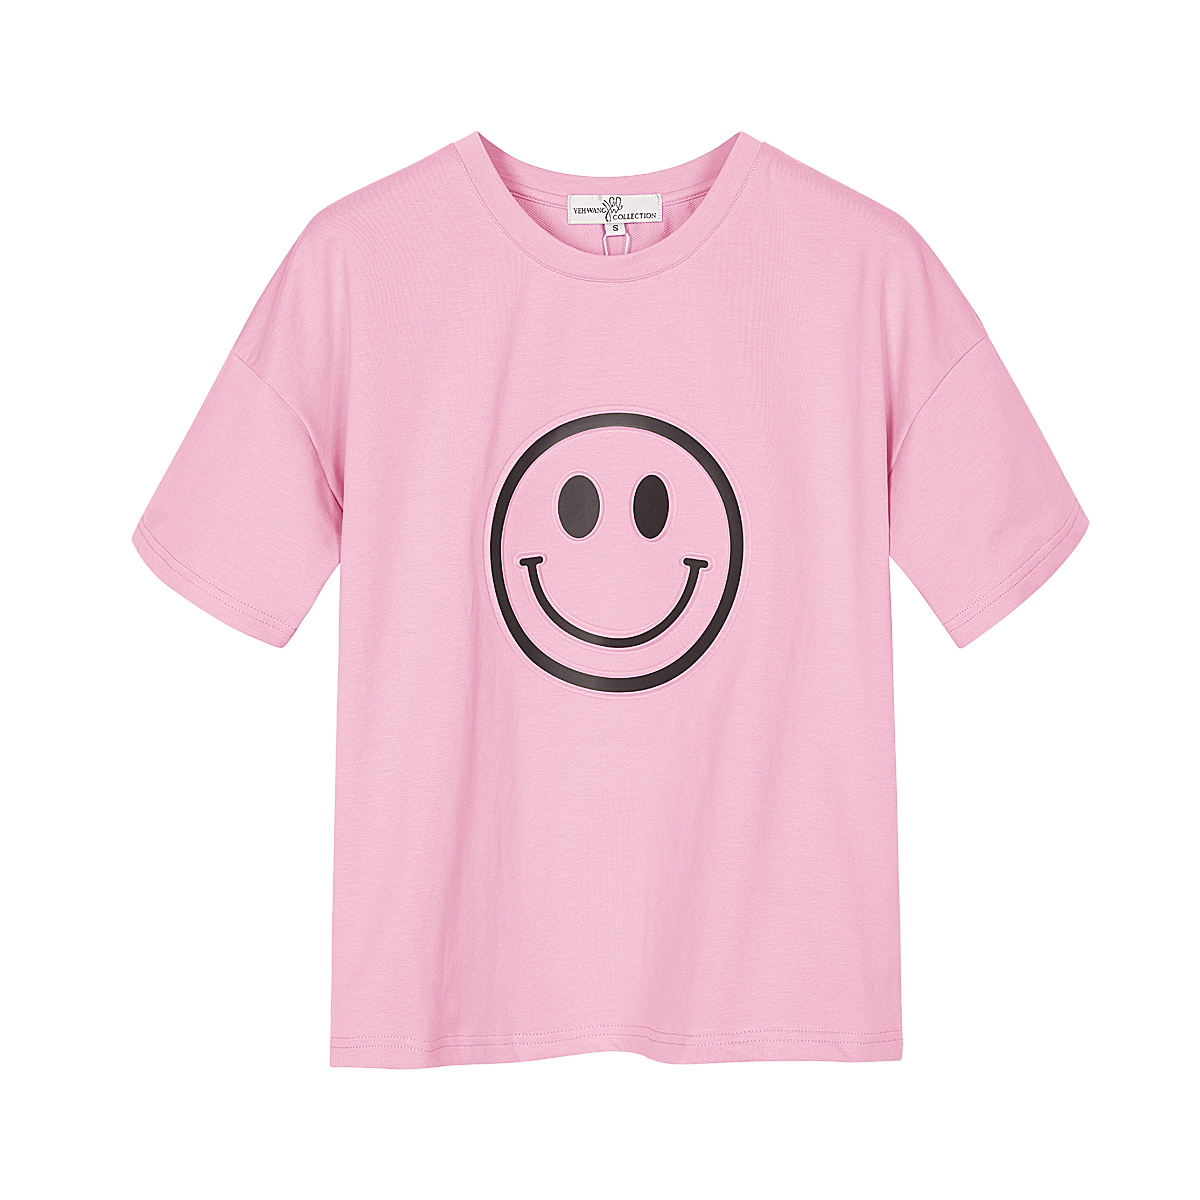 T-shirt with smiley face